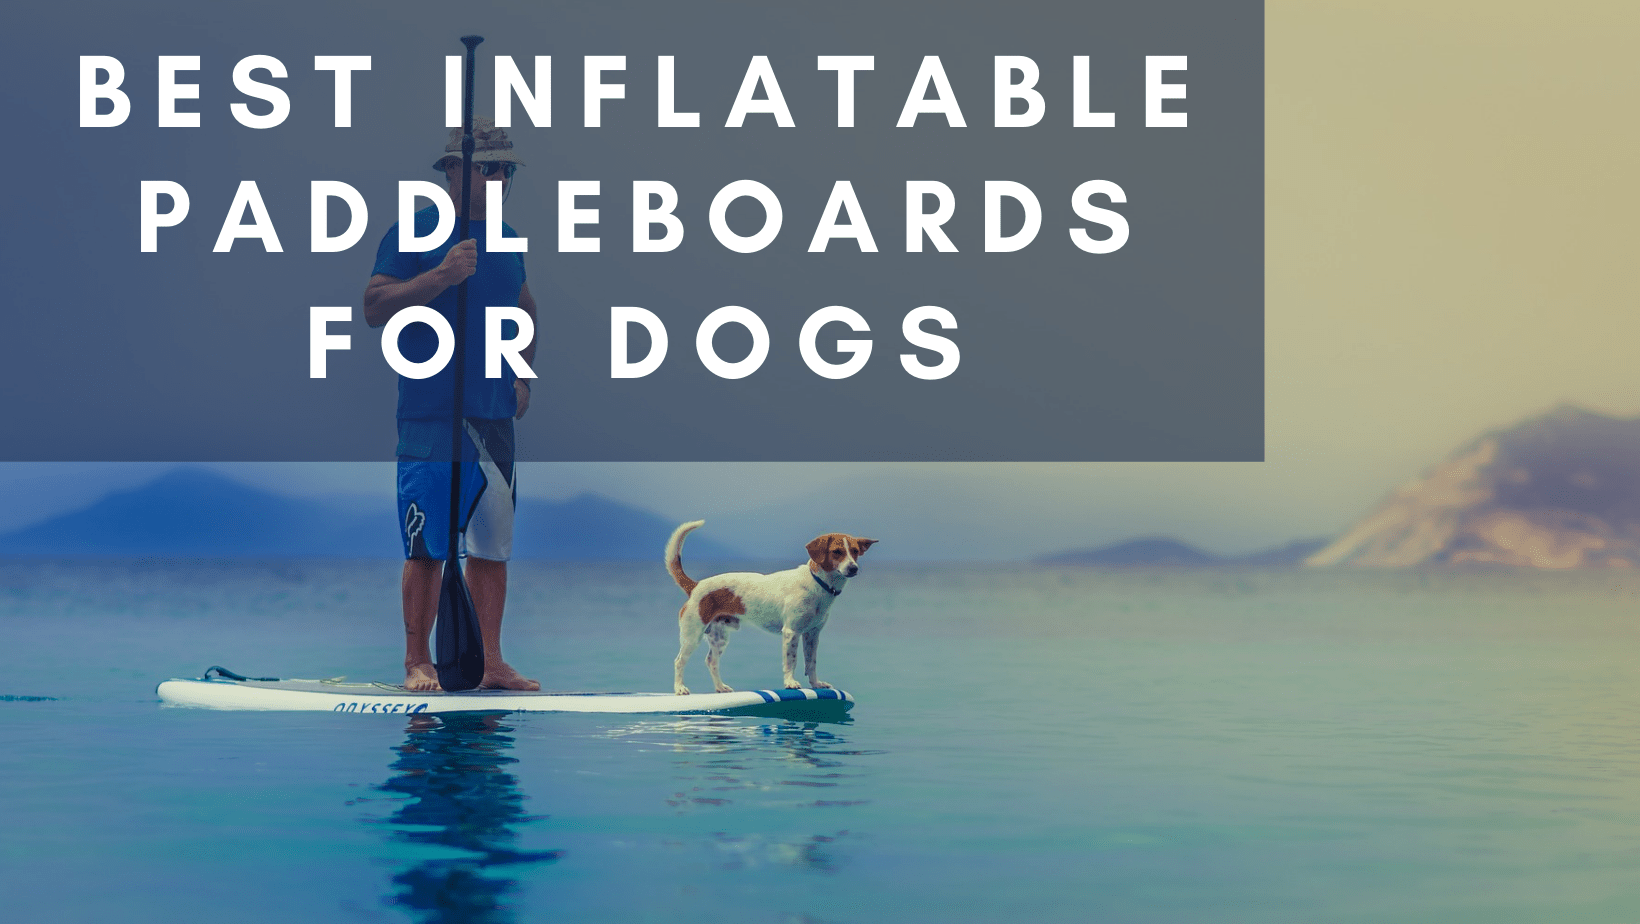 Best Inflatable Paddleboards for Dogs